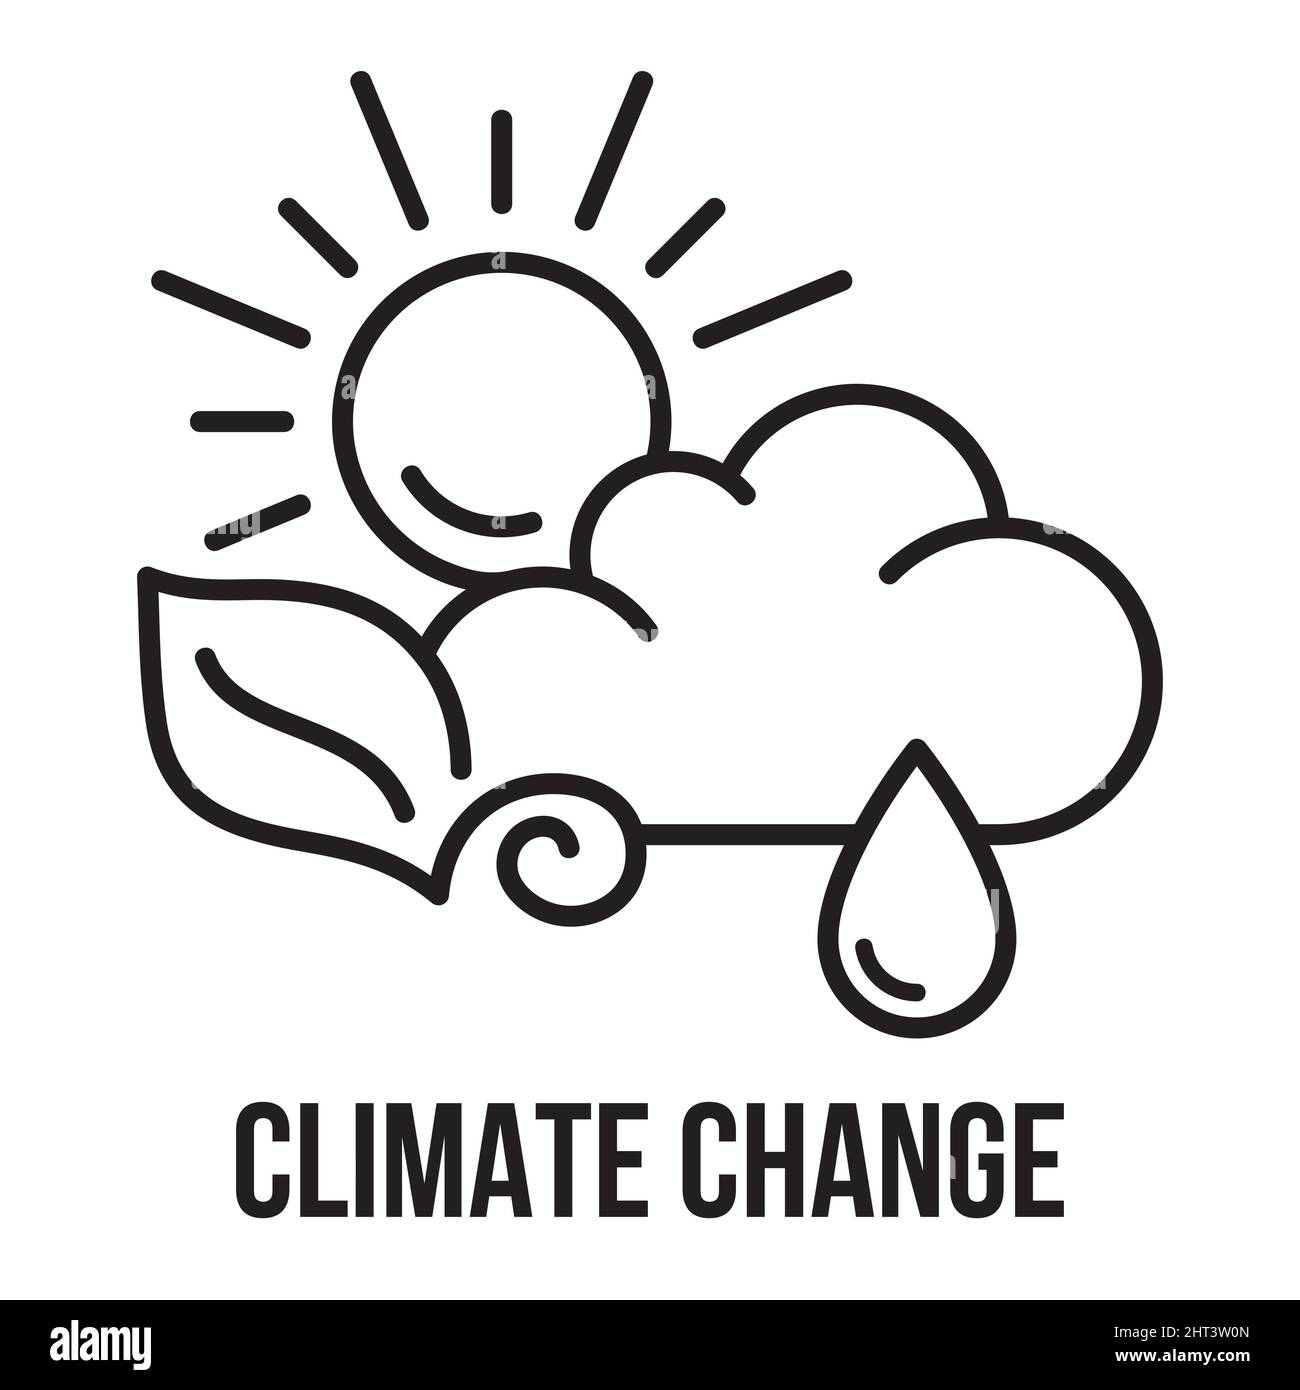 Ecology. Climate change icon. problem global warming, Global climate changes danger. Stock Vector